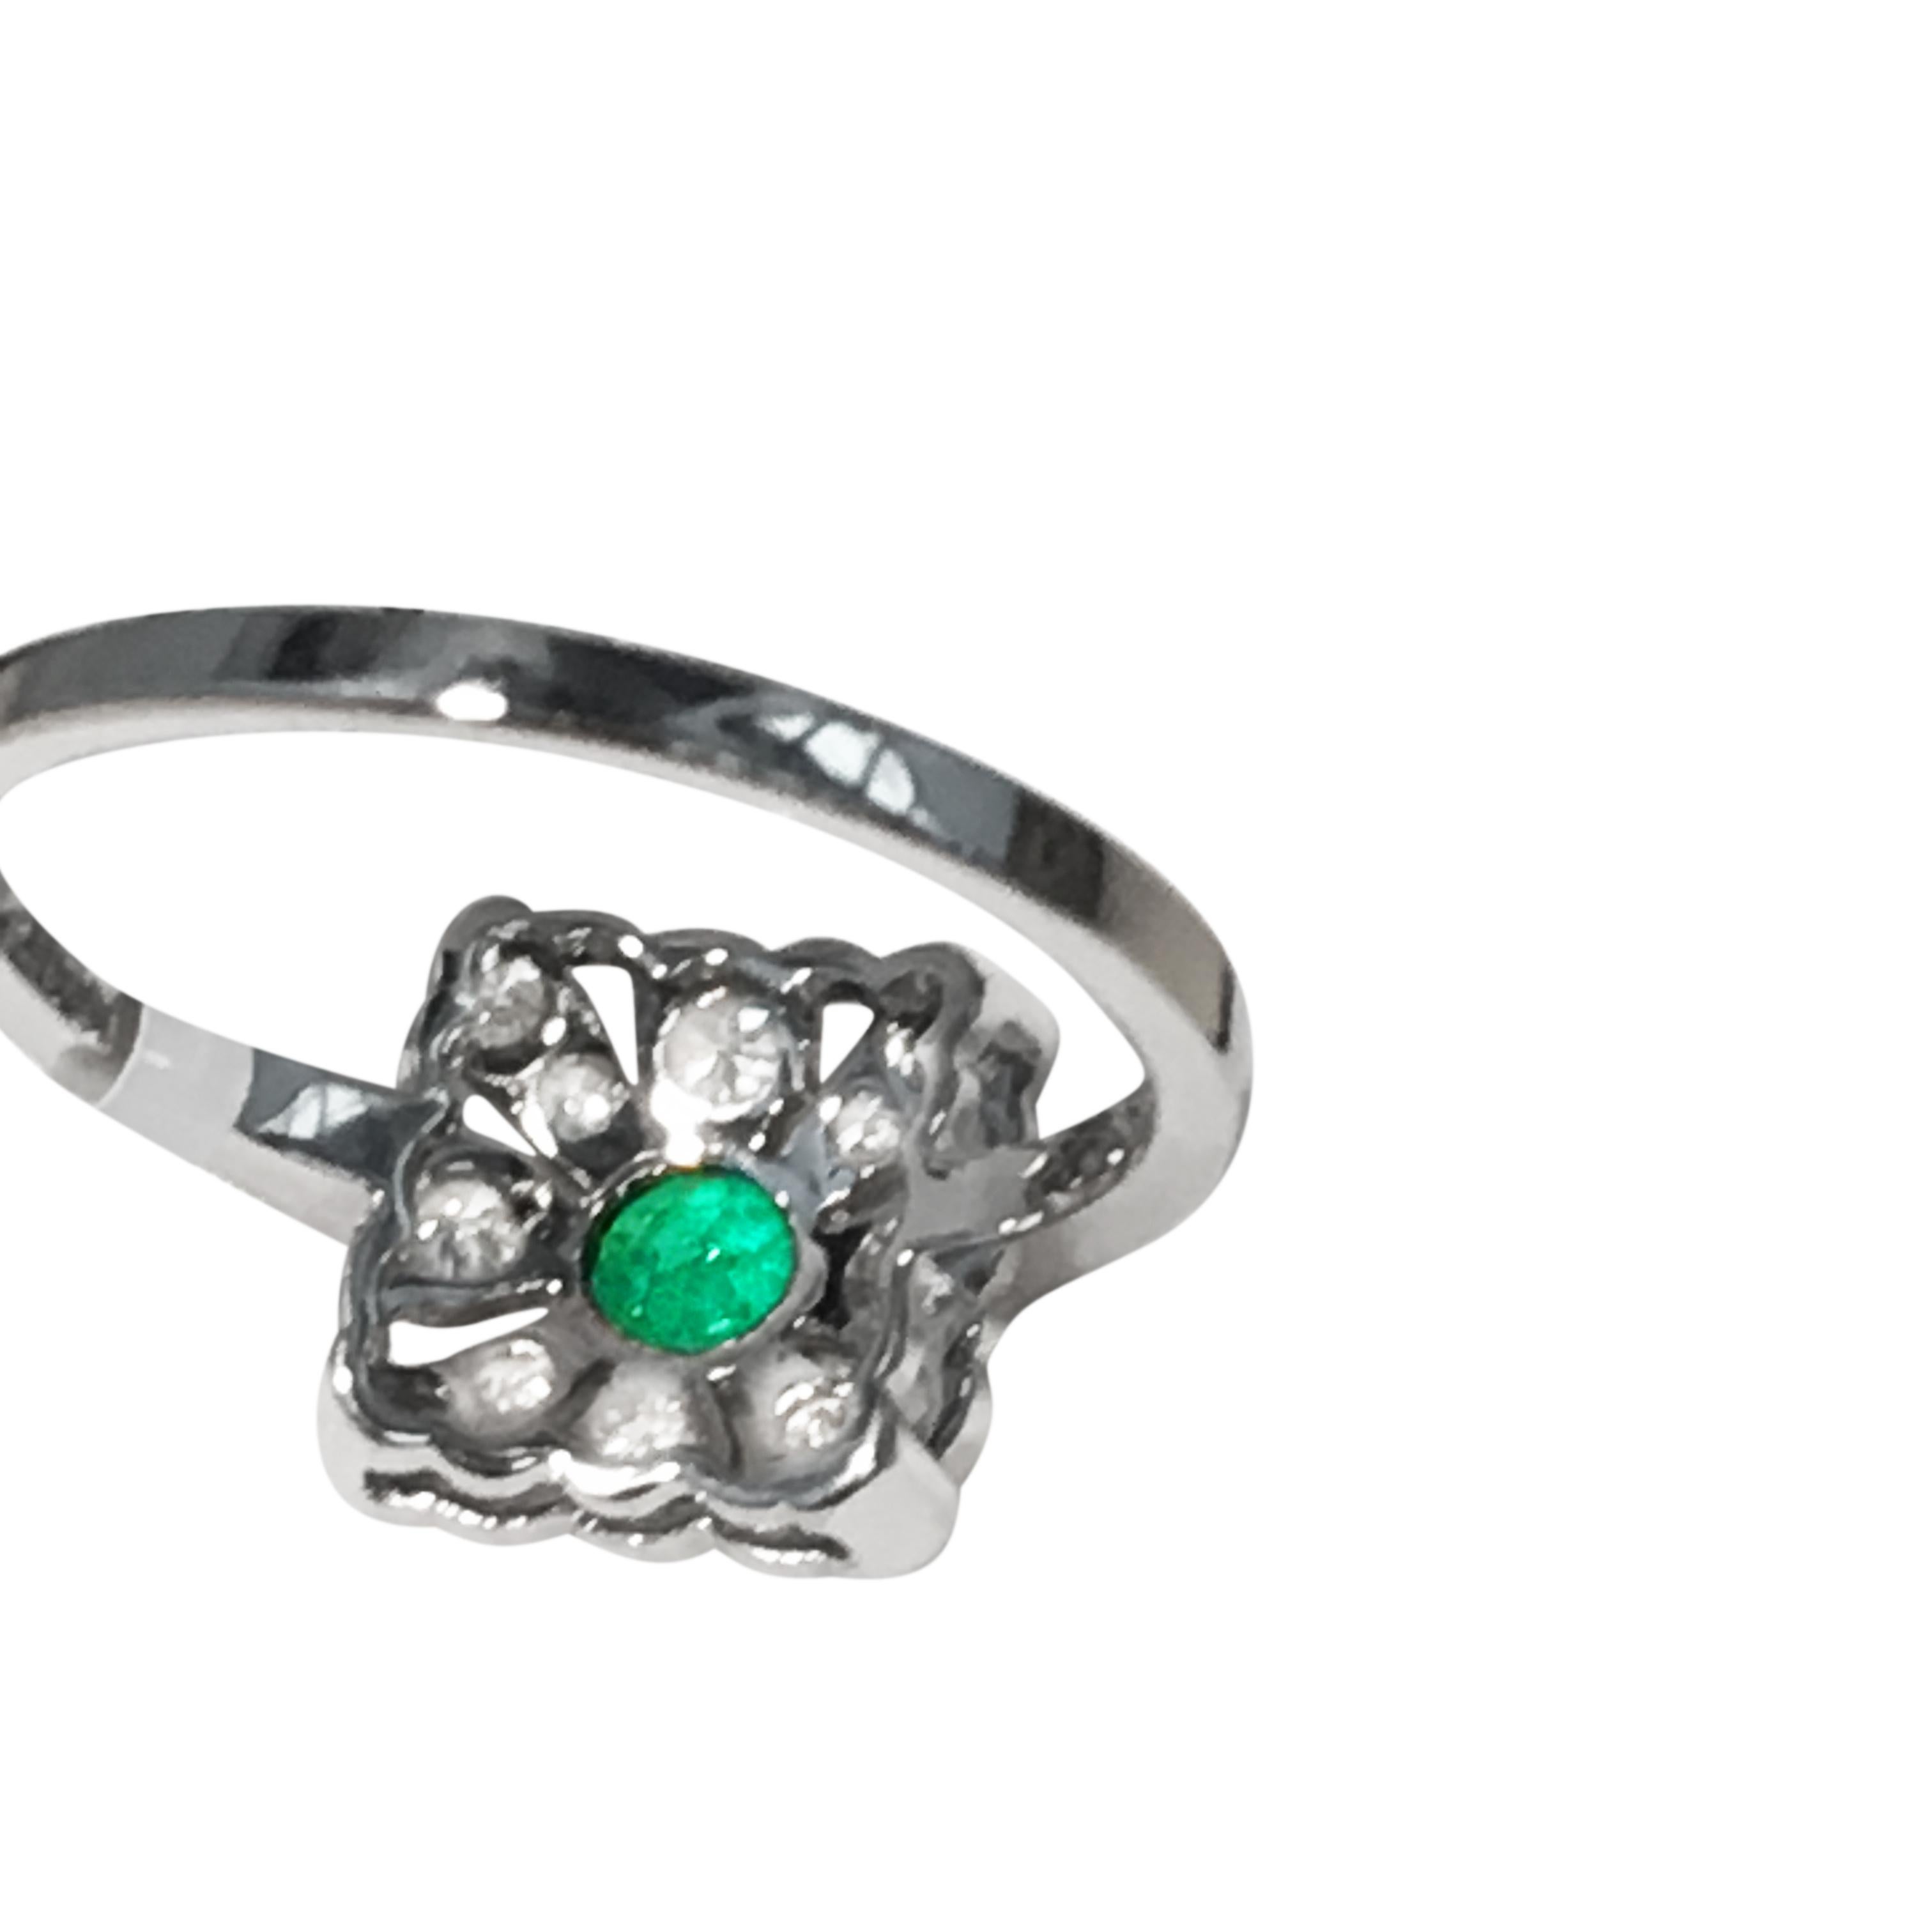 Contemporary Art Deco Style 18 Carat White Gold Diamond Emerald Engagement Ring For Sale